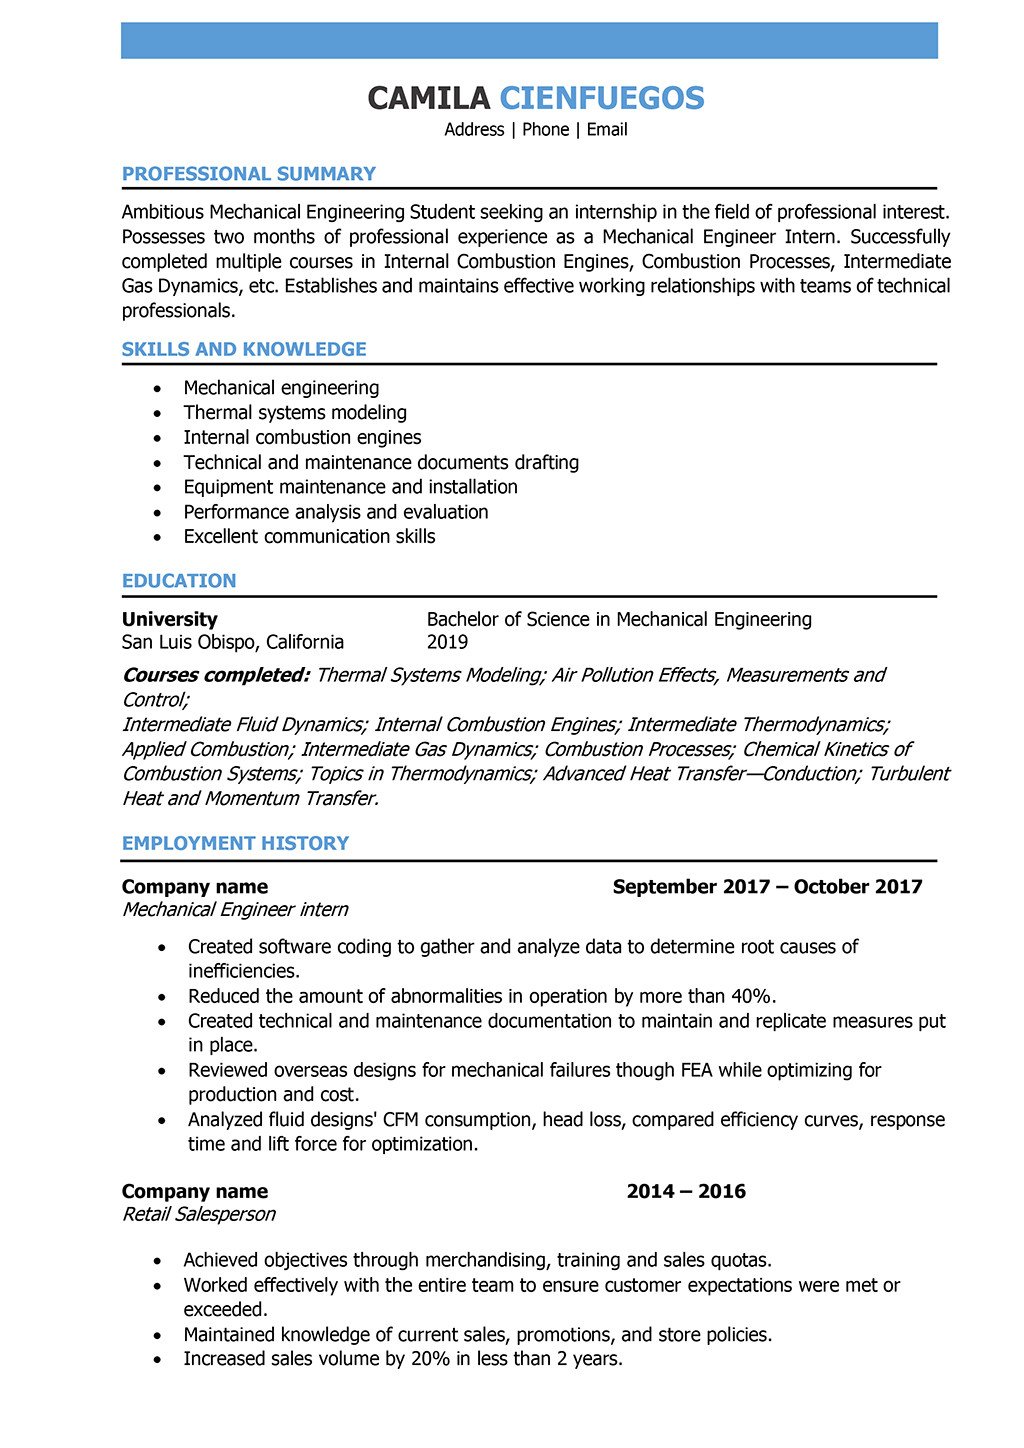 Mechanical Engineer Resume Samples and Writing Guide